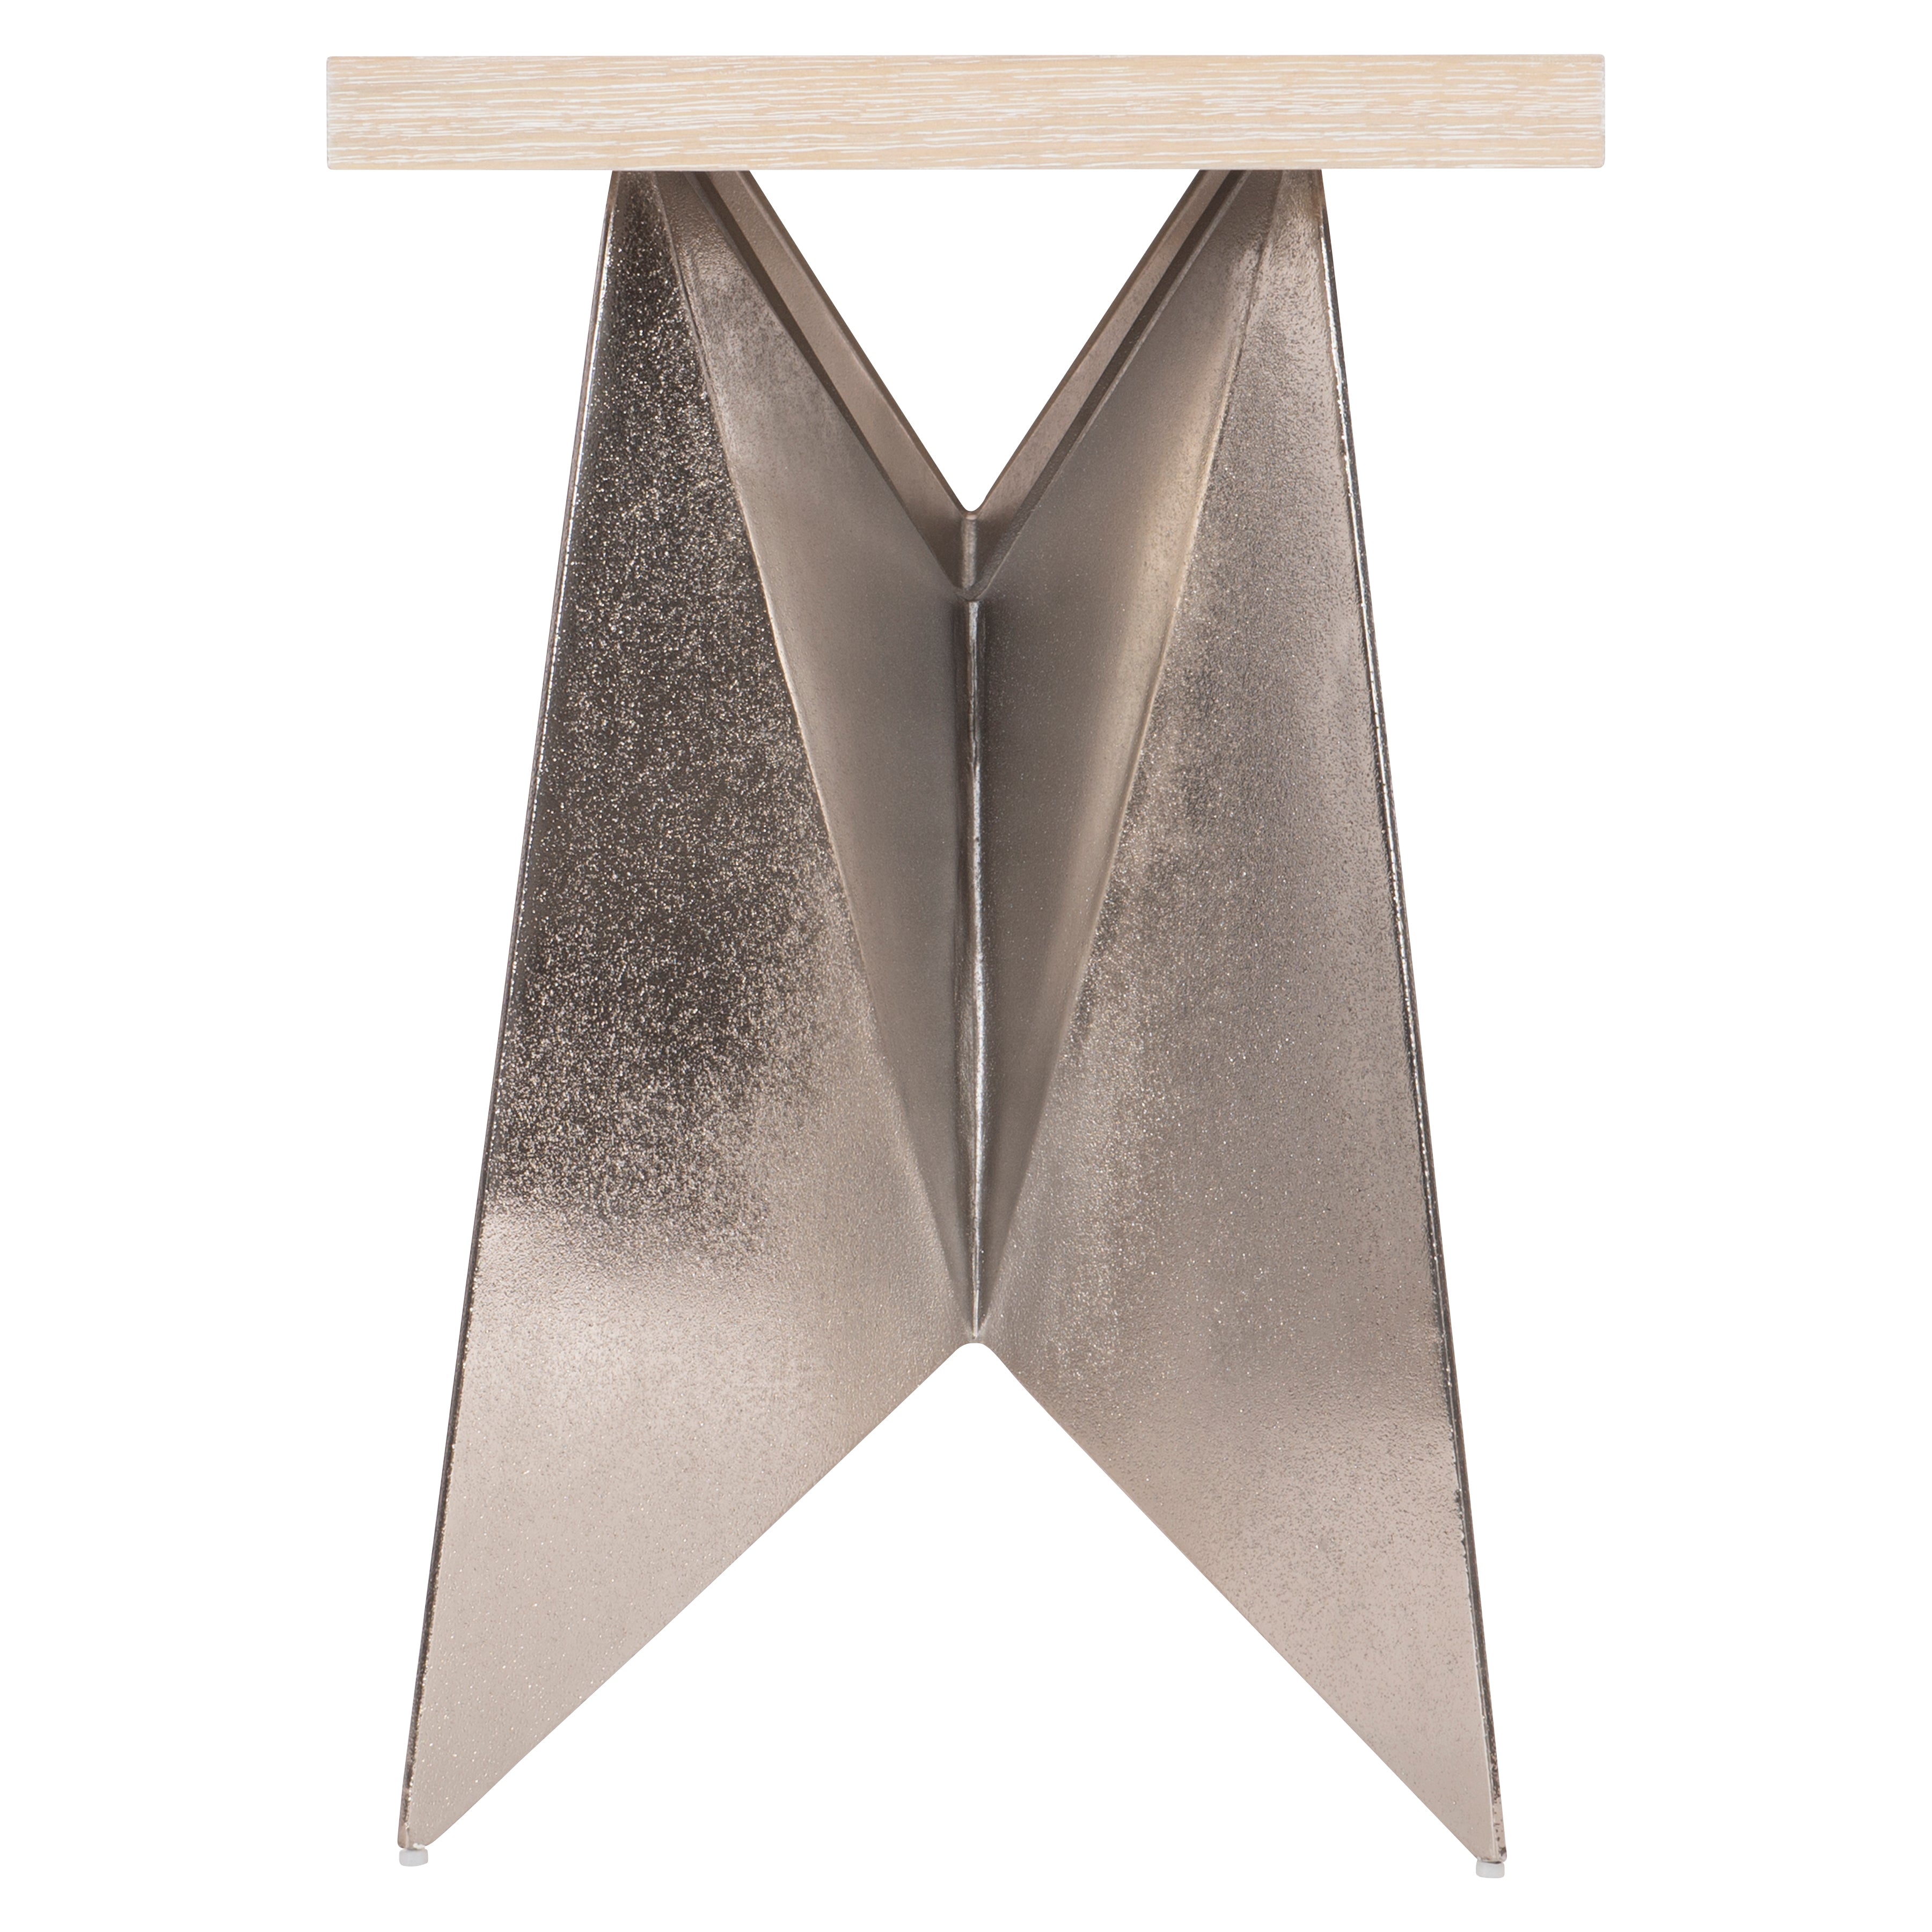 Solaria Console Table with 2 Metal Origami-inspired Bases